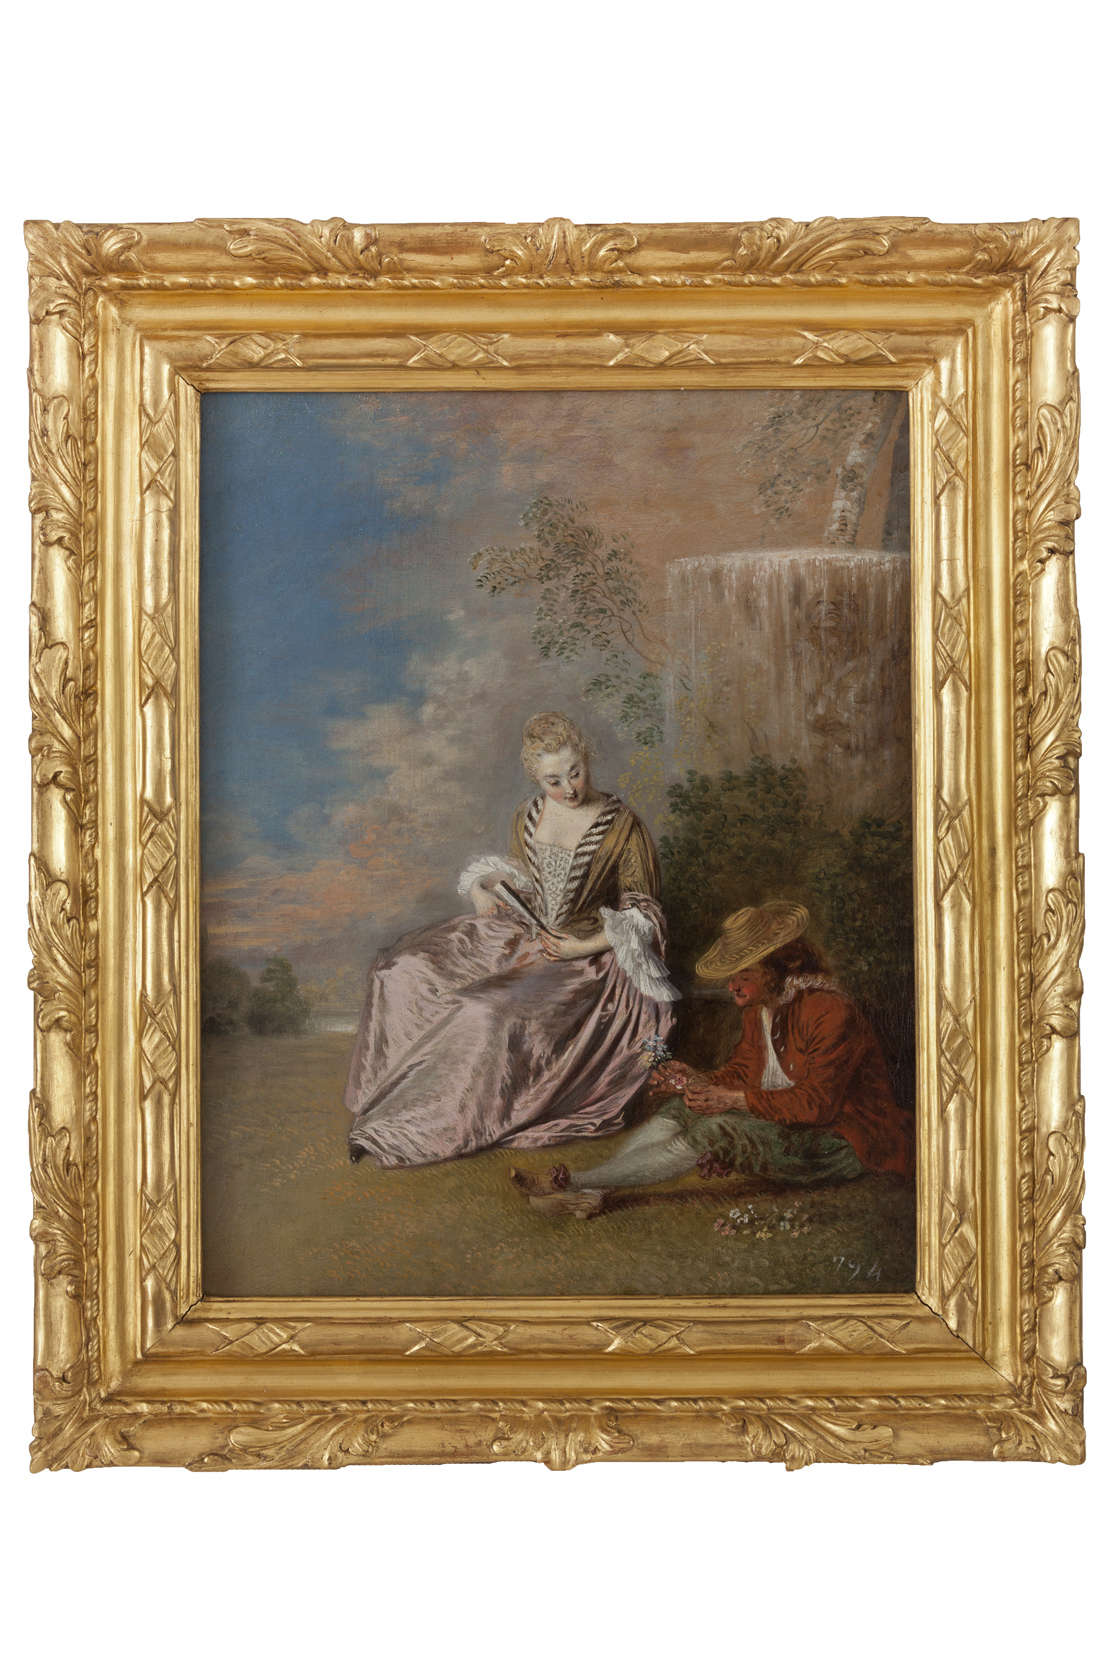 Jean-Antoine Watteau, The Lover (1718-1719; oil on canvas, 41 x 32.5 cm; Madrid, Royal Collections Gallery)